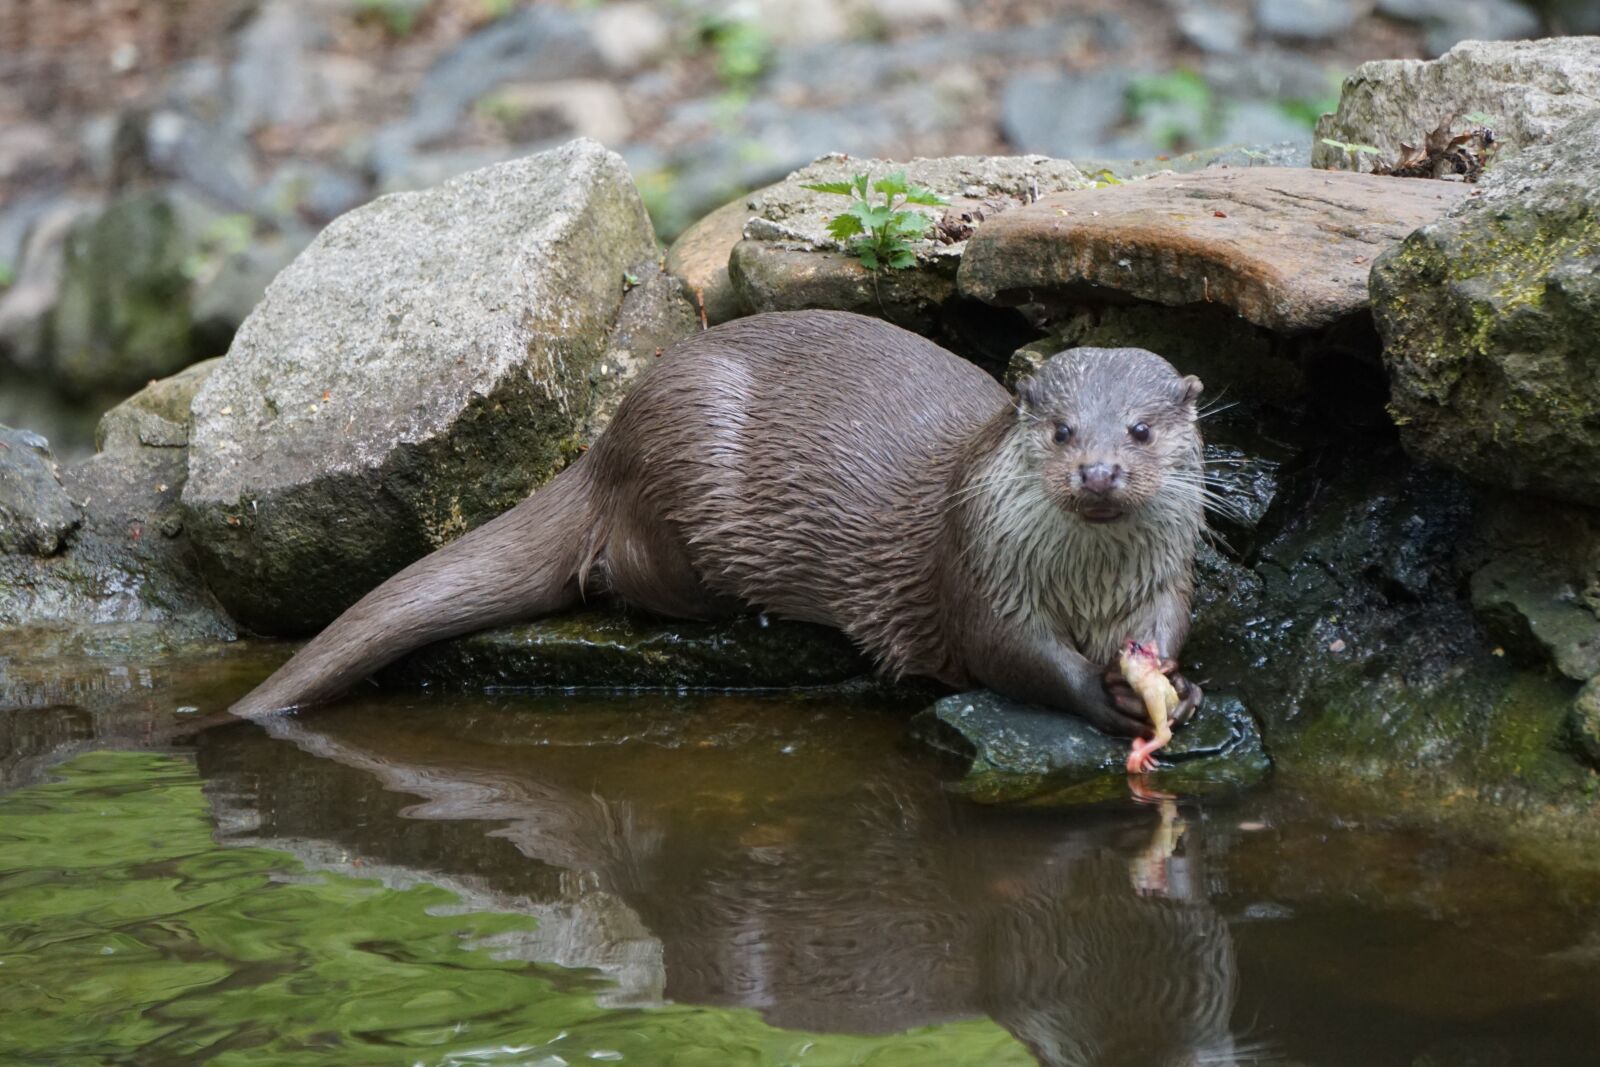 Sony a6000 sample photo. Otter, animal, nature photography